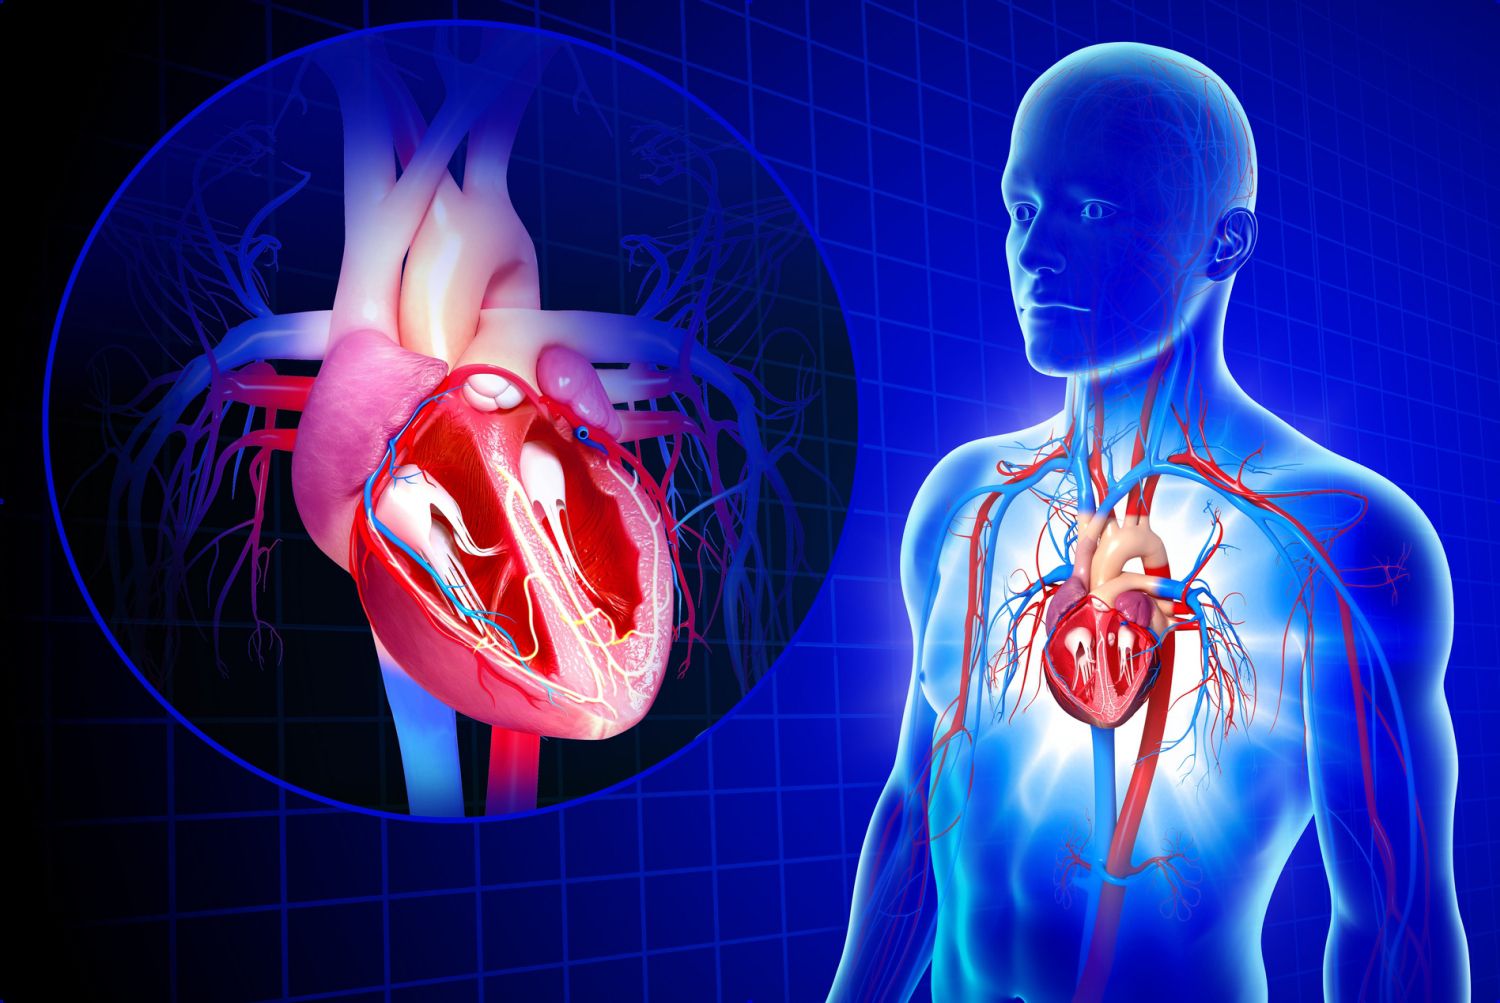 hs-cTnT Can Provide an Accurate Diagnosis of Heart Attack